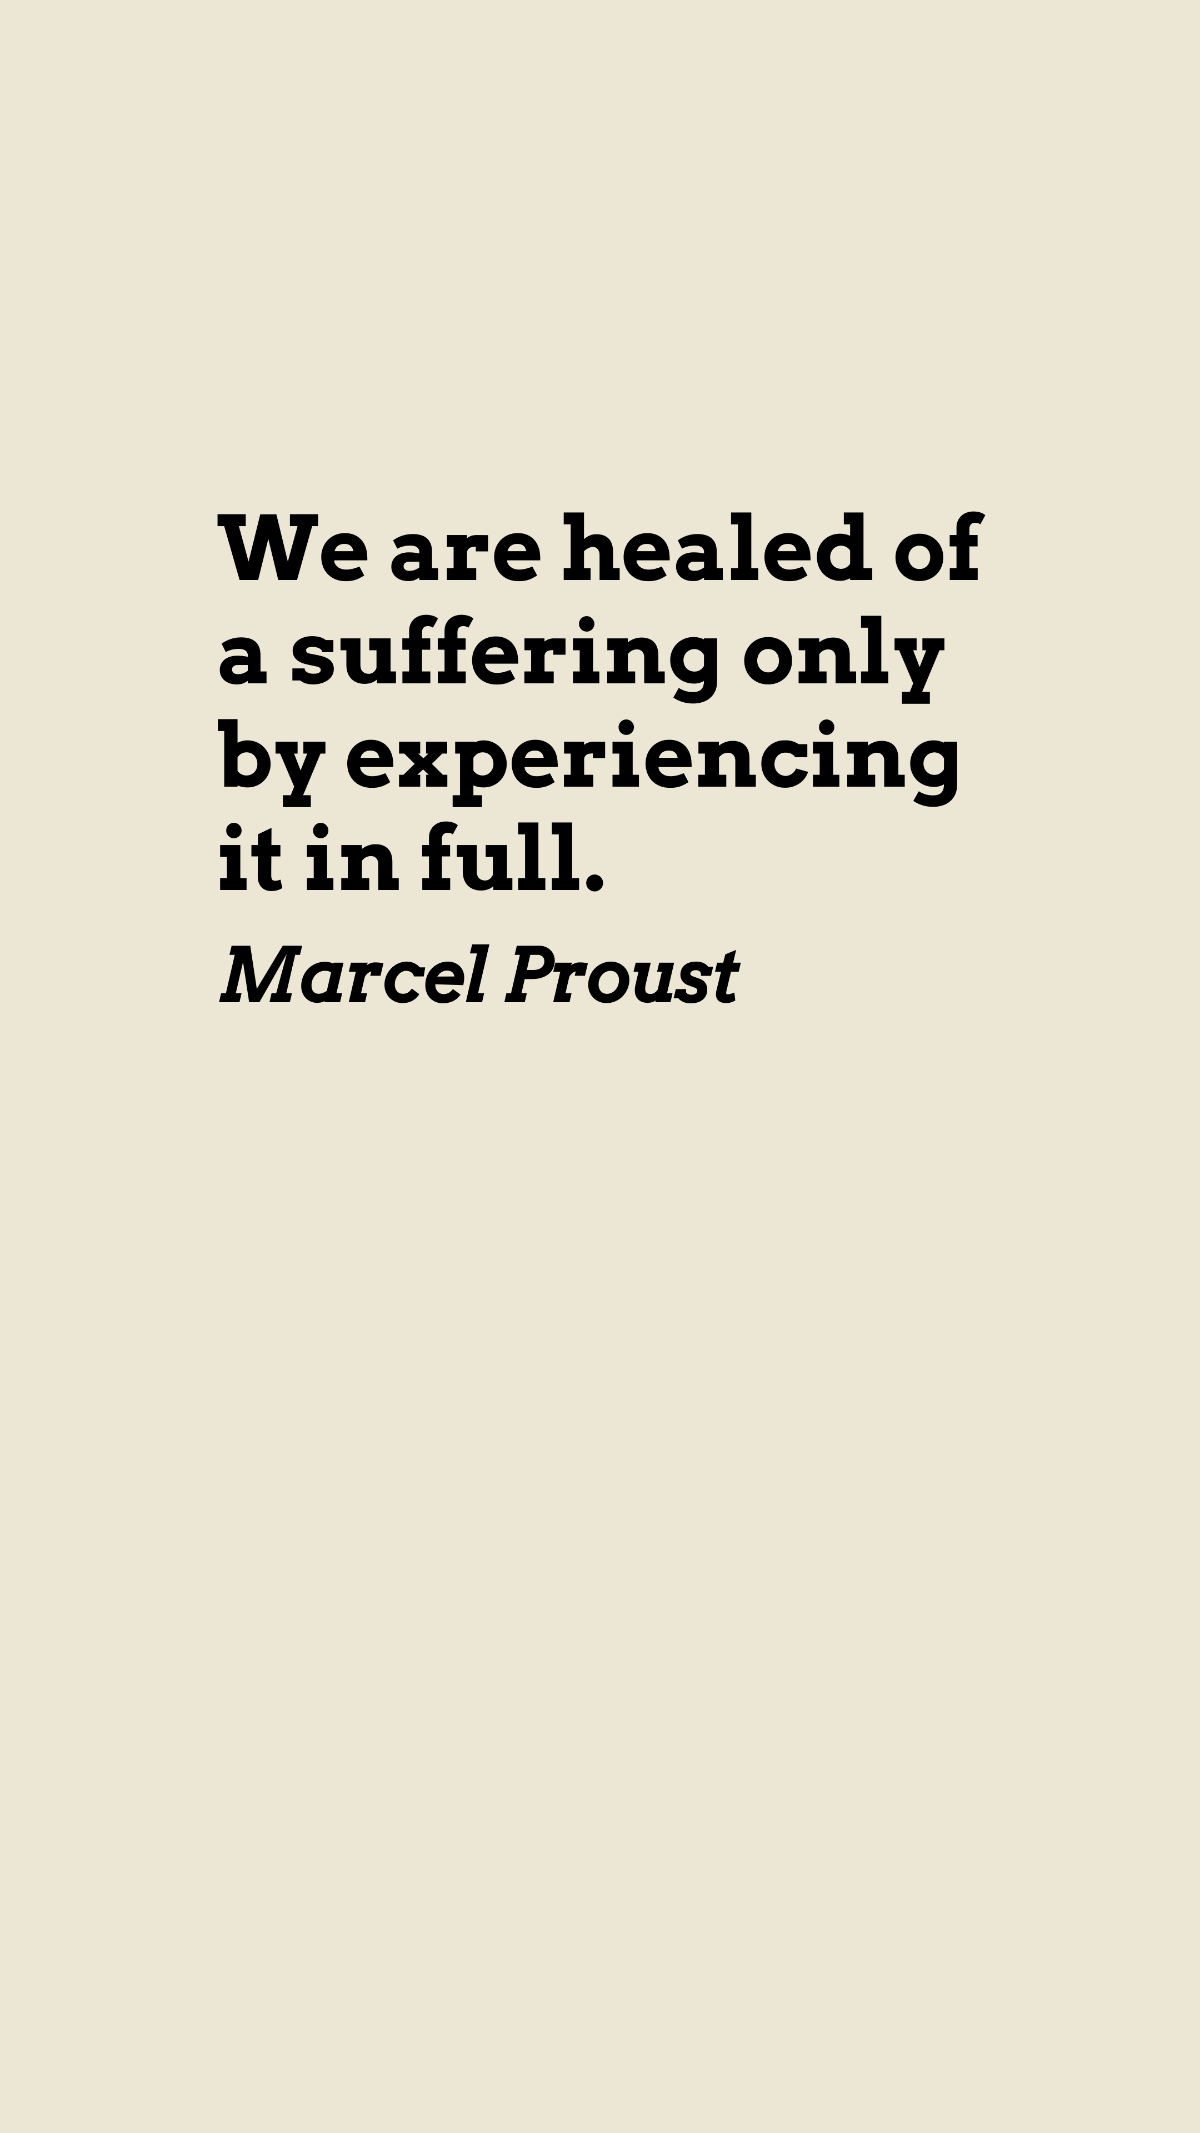 Marcel Proust - We are healed of a suffering only by experiencing it in full.